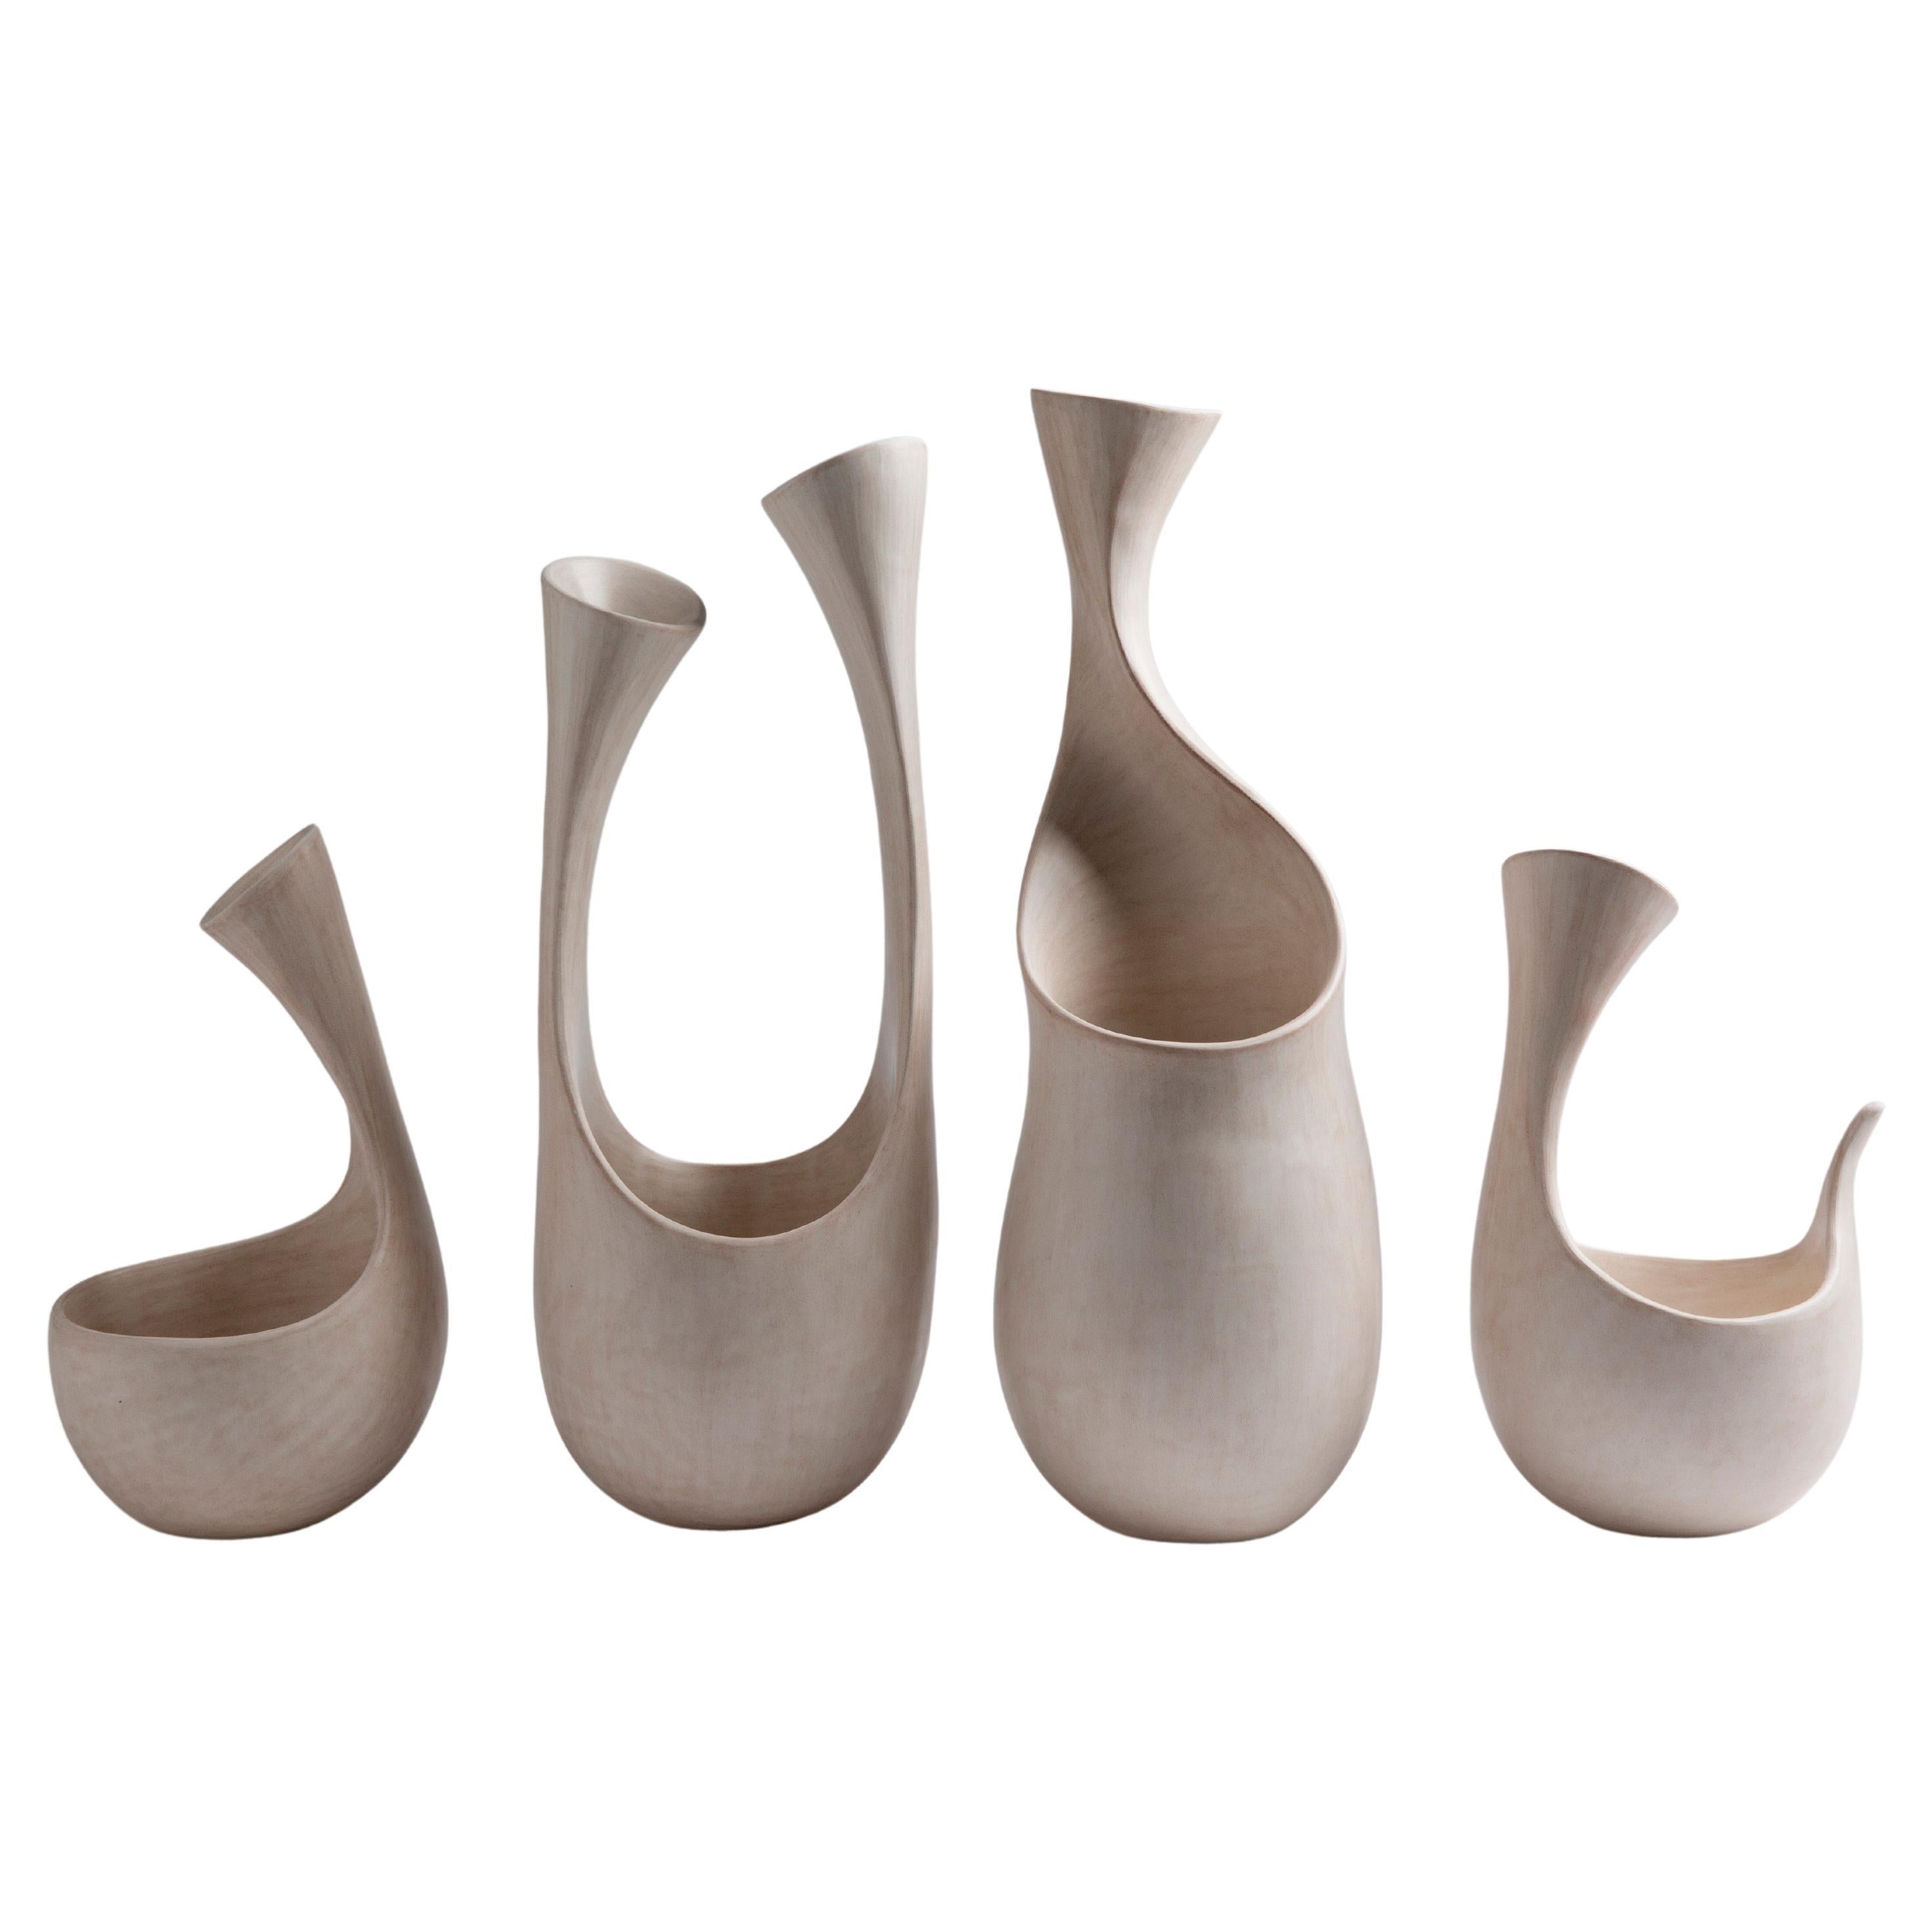 Group of Fluted Bowl-like Ceramic Vessels, Tina Vlassopulos For Sale